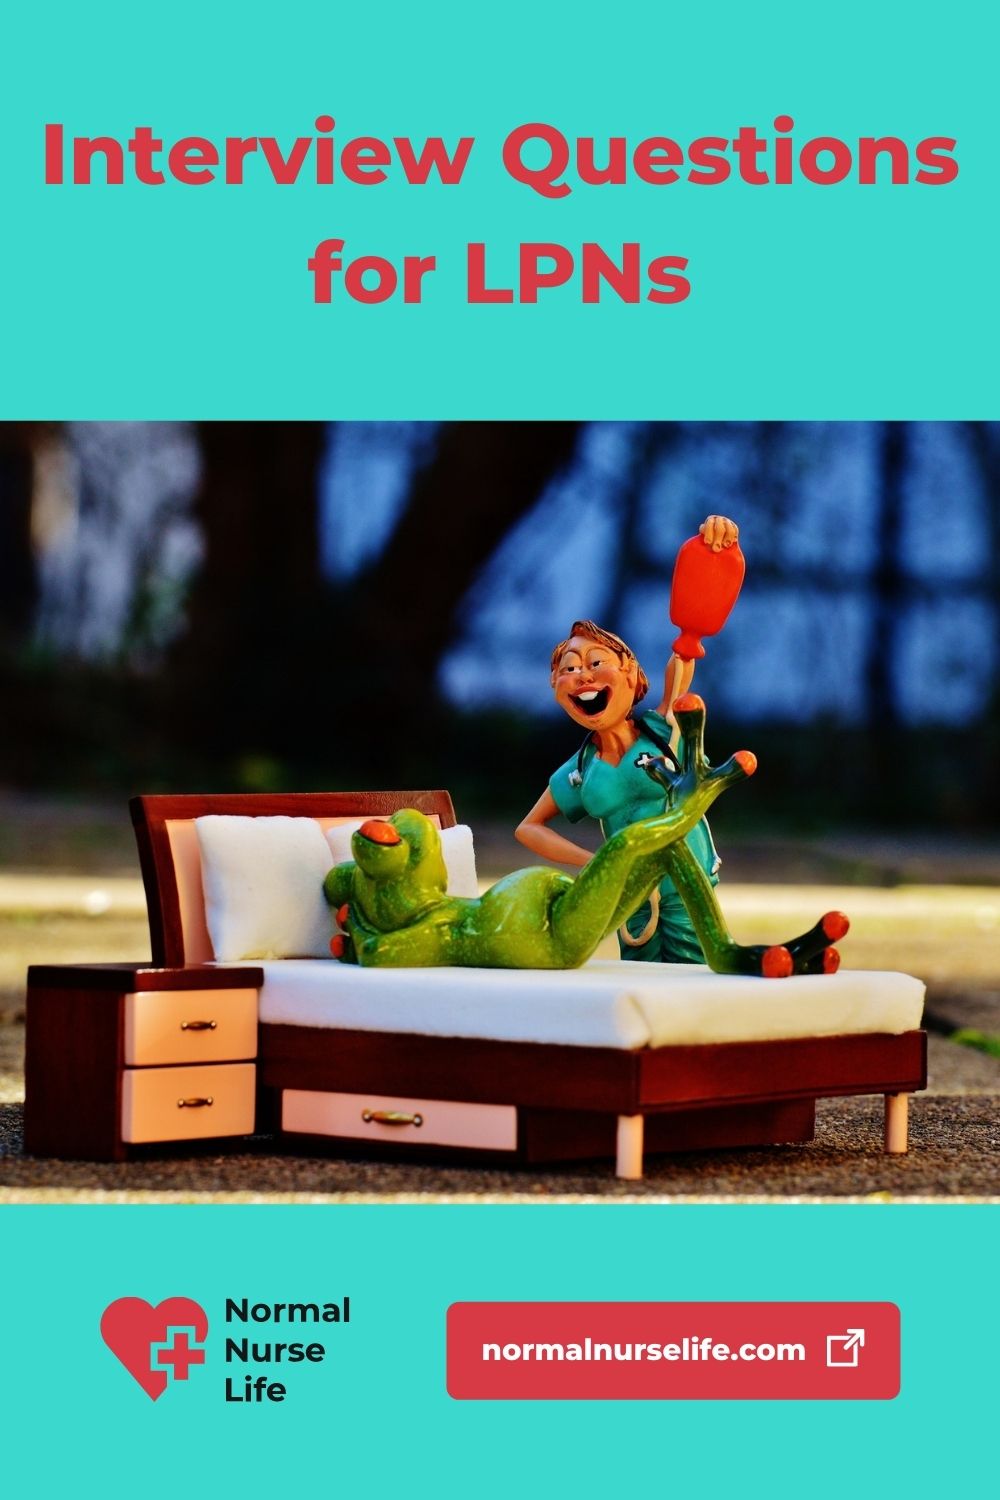 Interview questions for LPNs